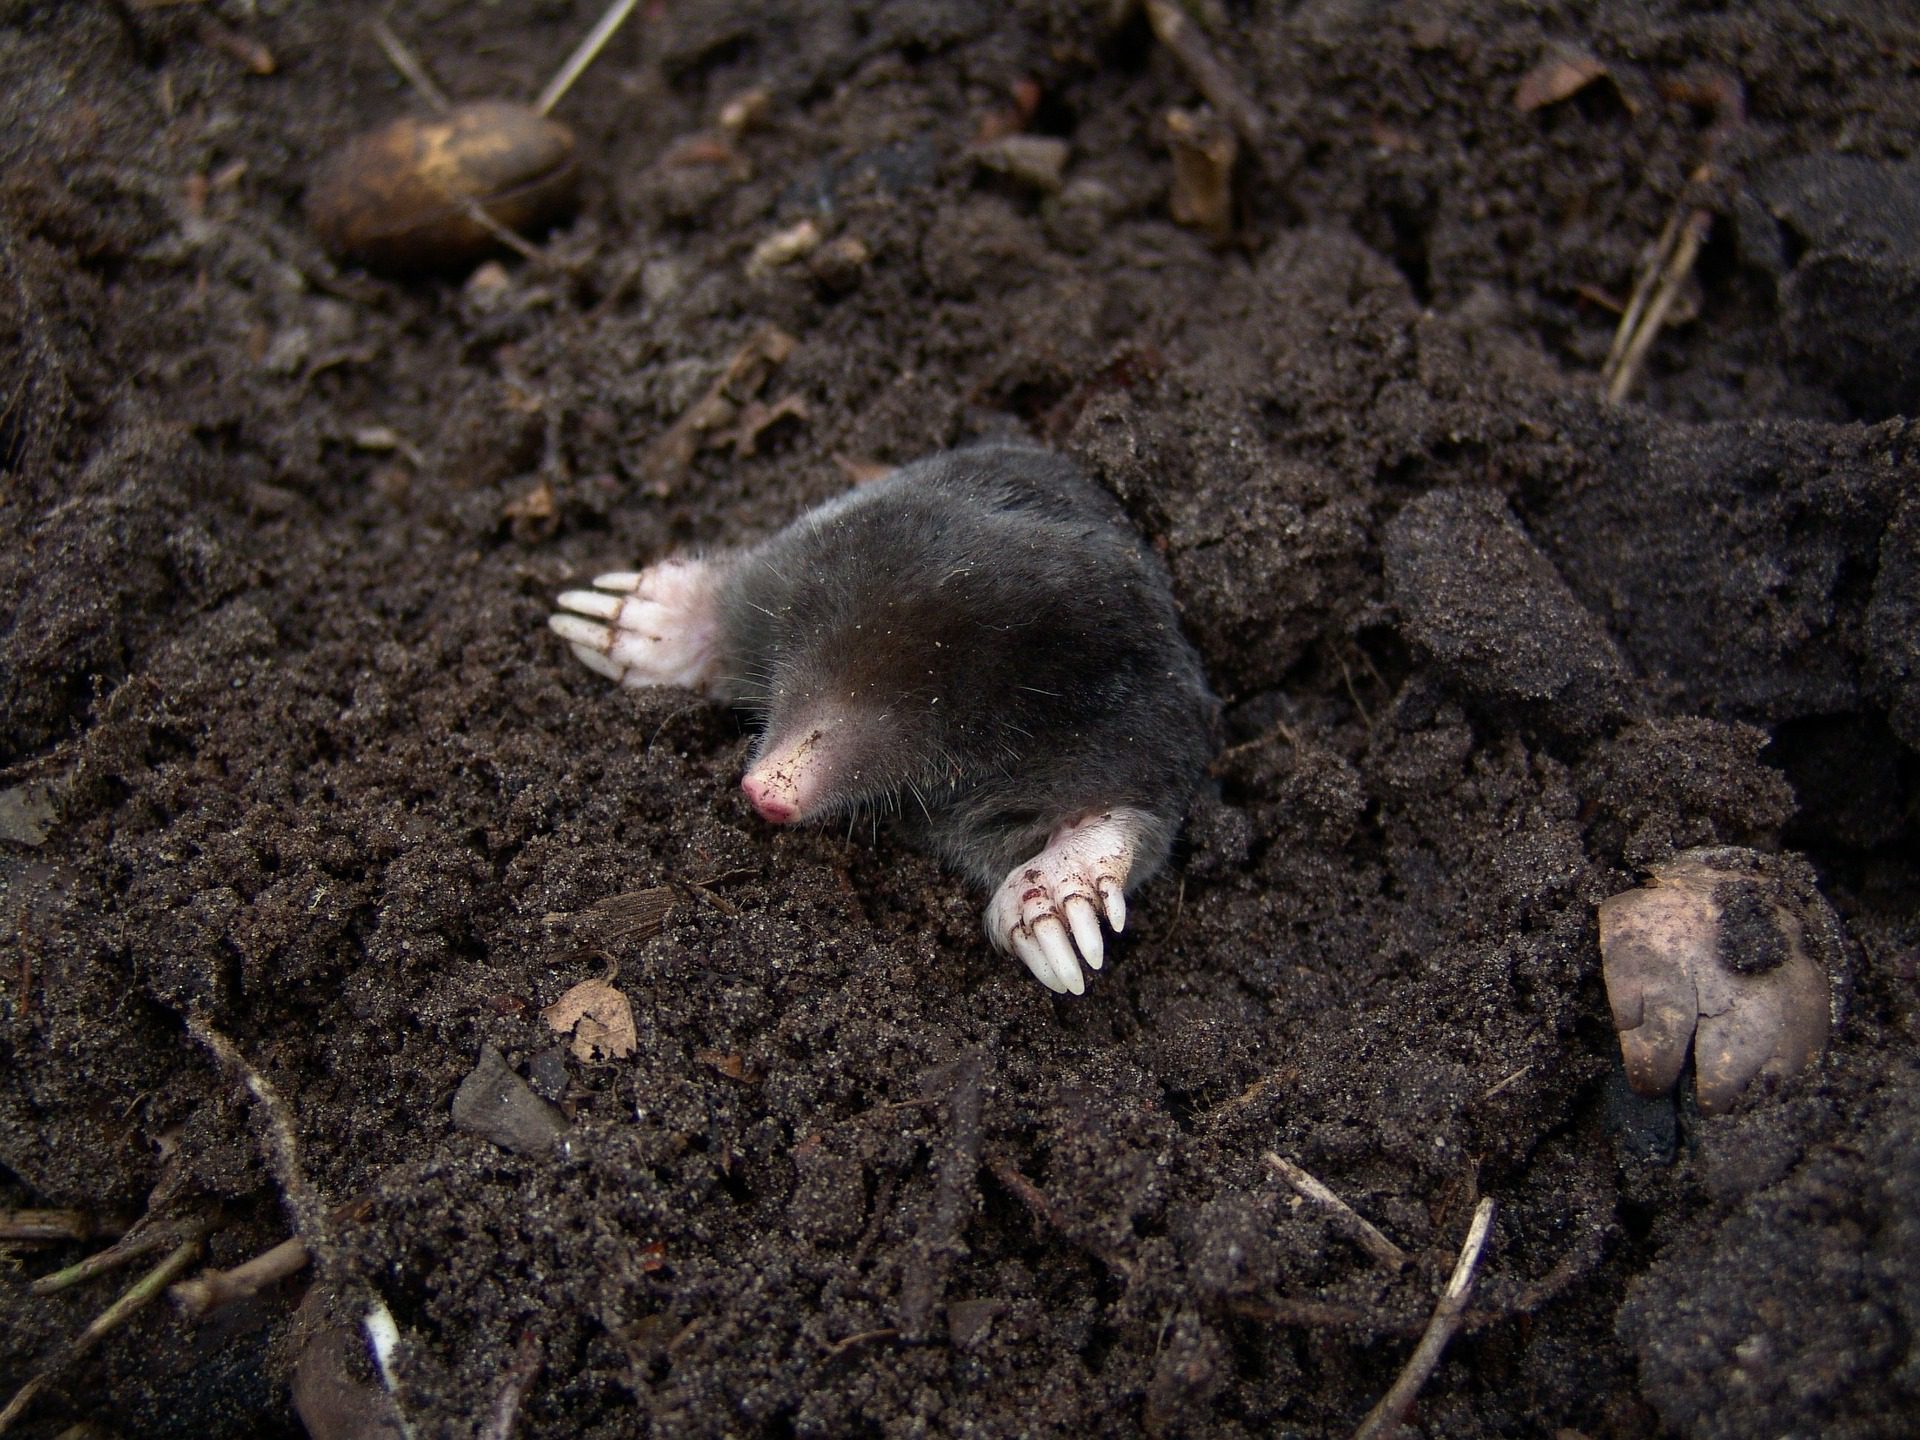 Mole poking its head and front feet out of the dirt.